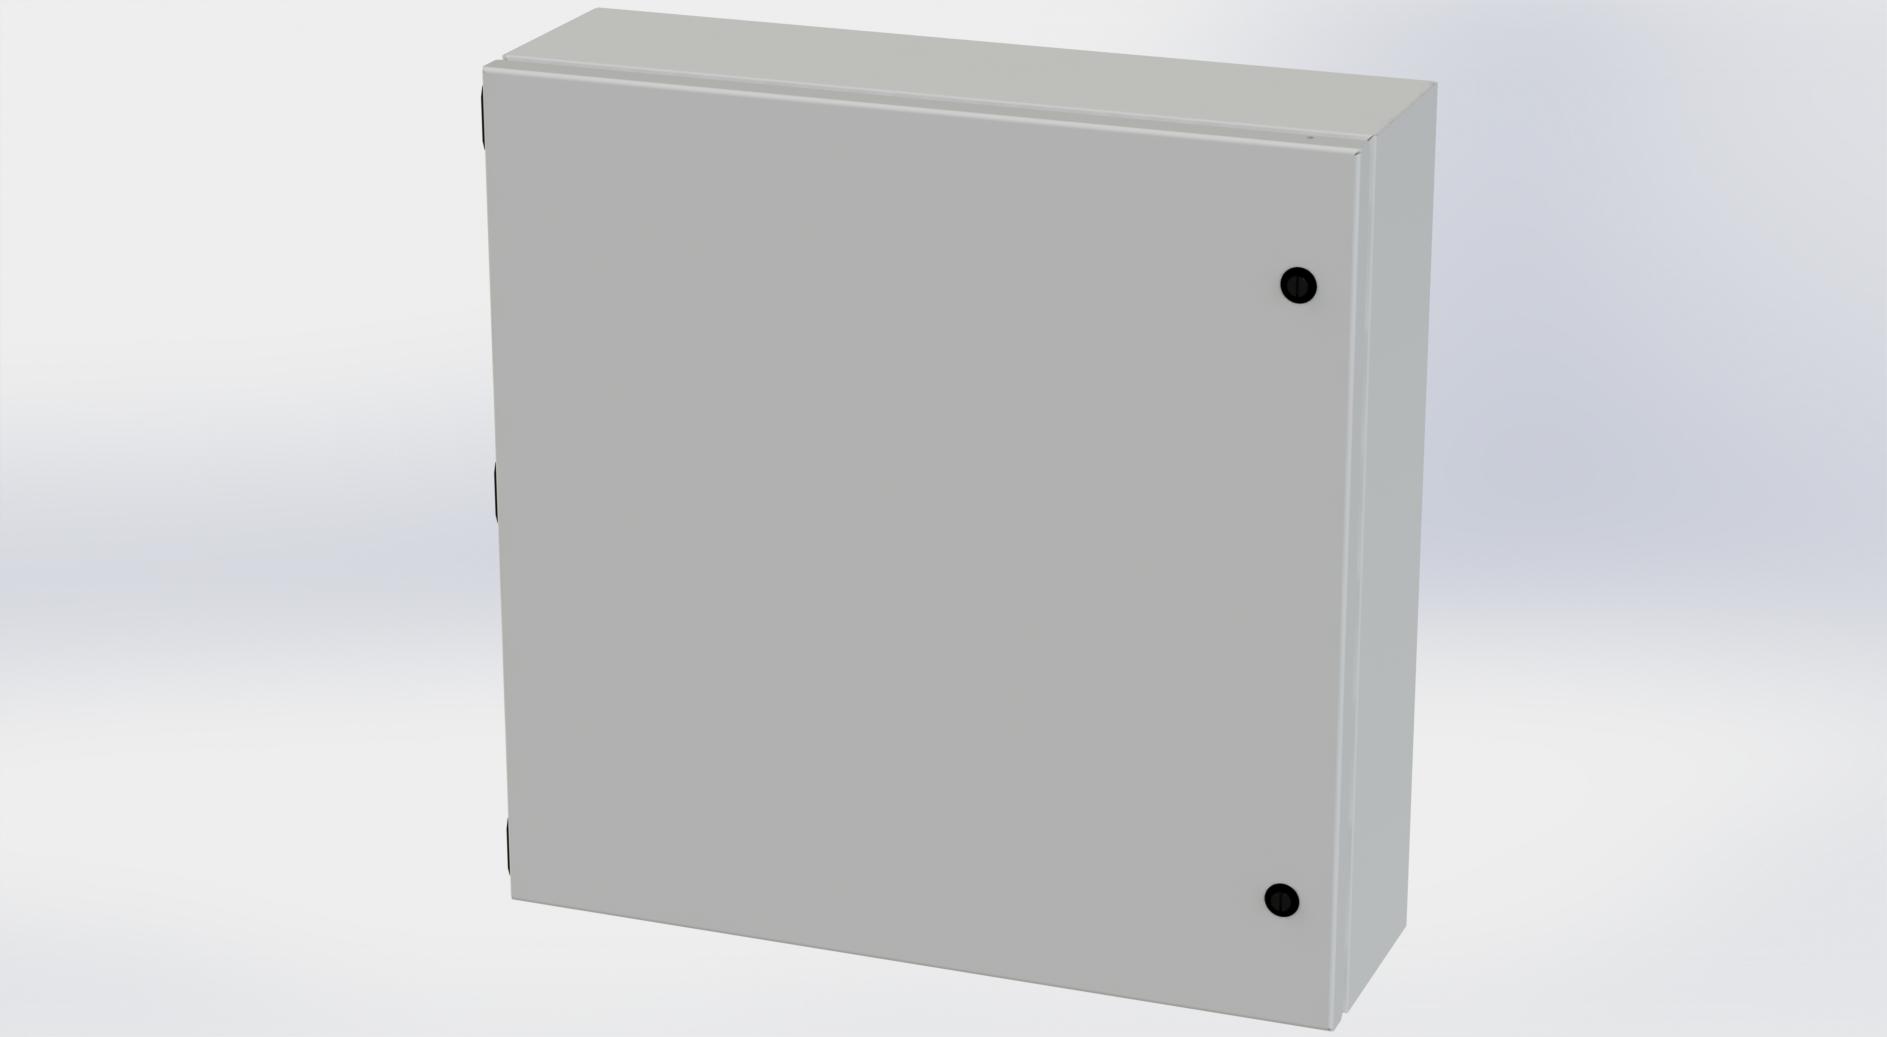 Saginaw Control SCE-20206ELJLG ELJ Enclosure, Height:20.00", Width:20.00", Depth:6.00", RAL 7035 gray powder coating inside and out. Optional sub-panels are powder coated white.